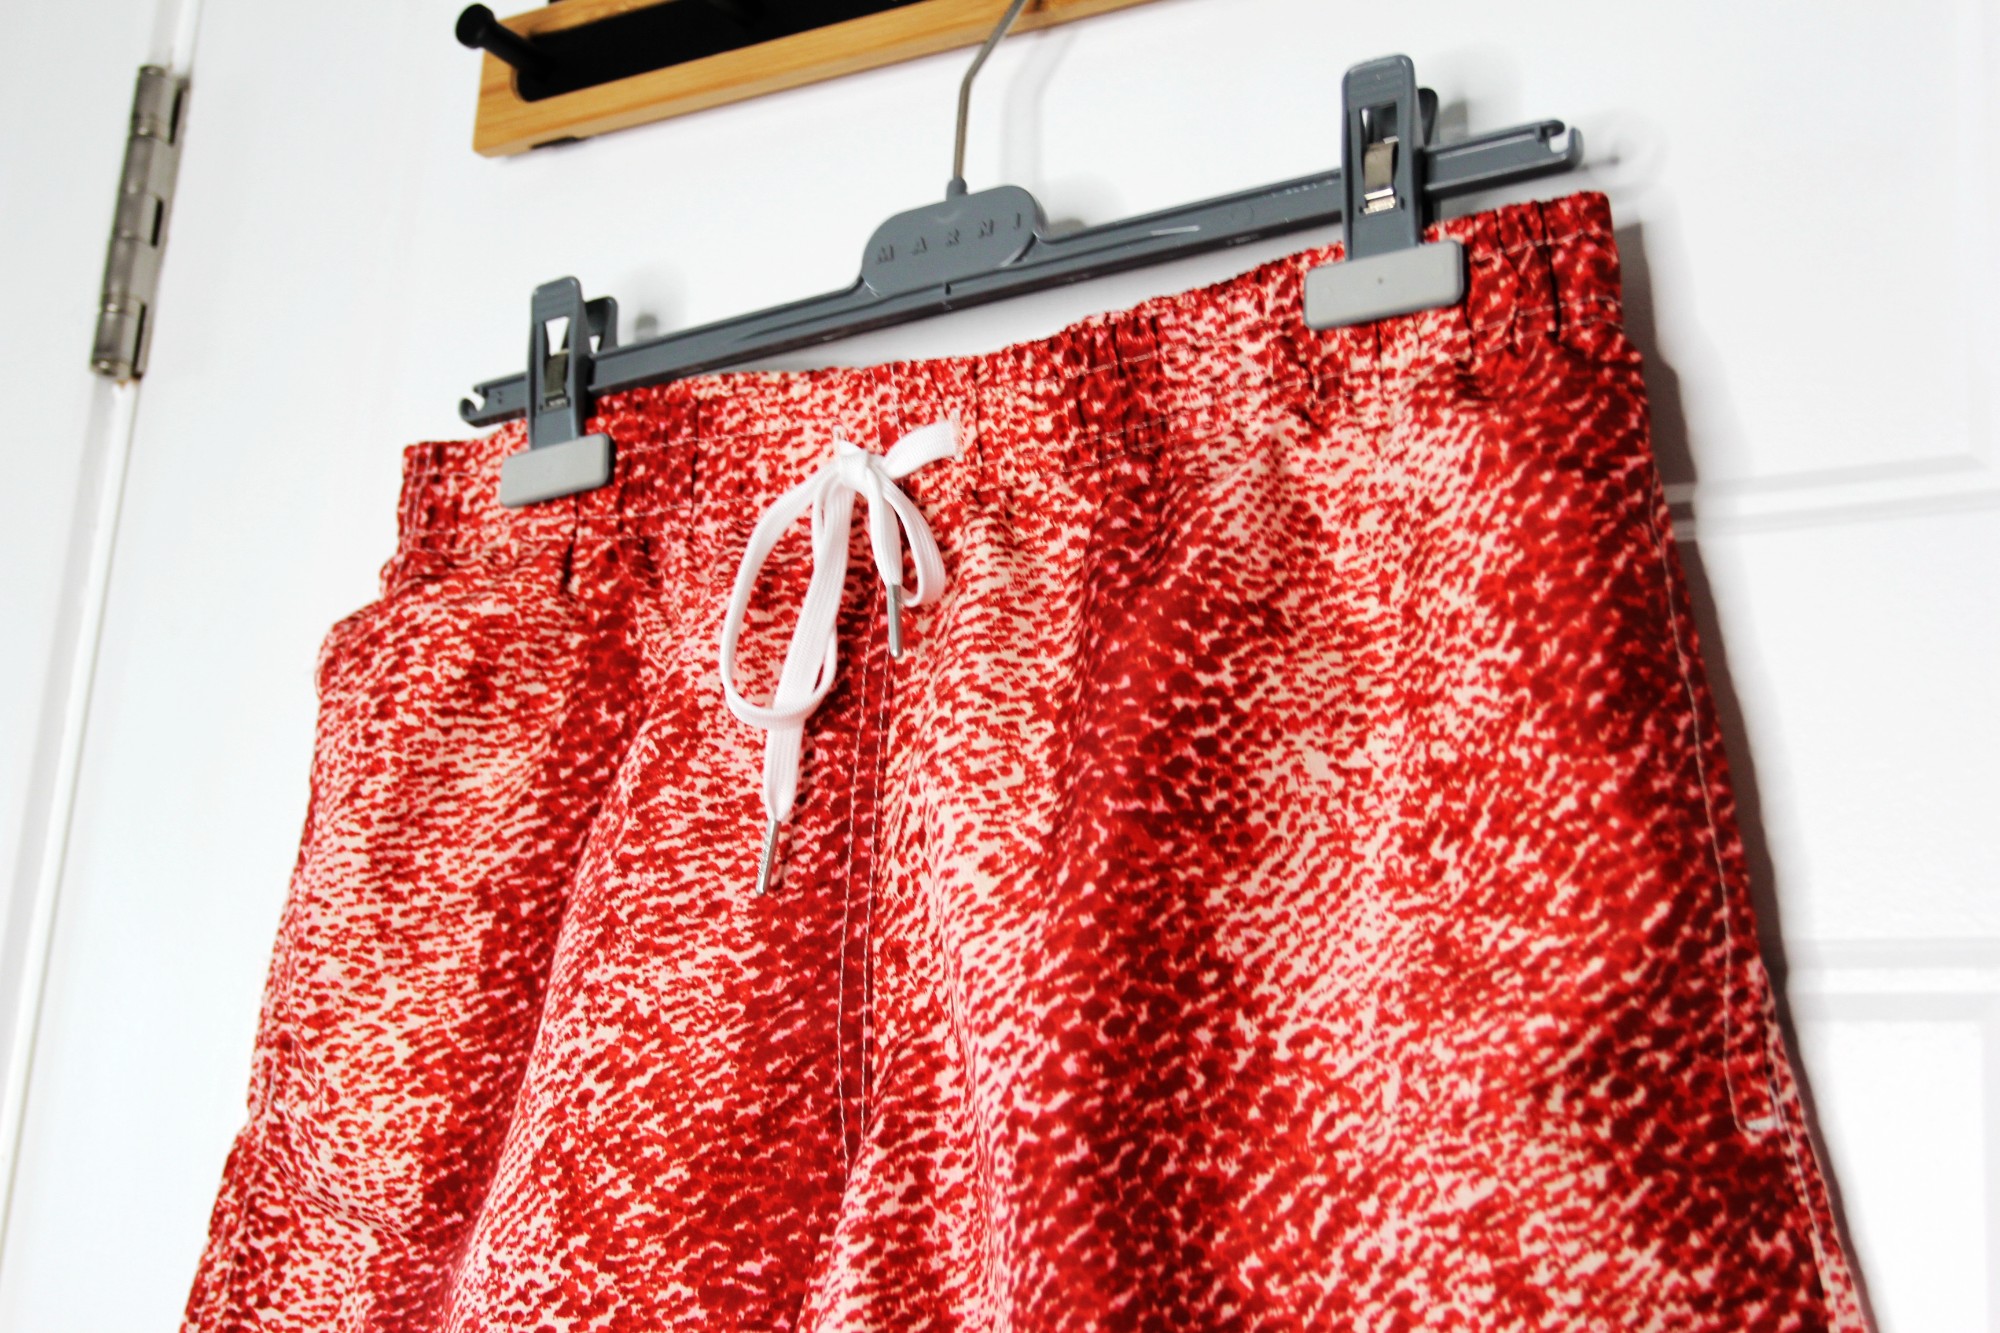 BNWT SS23 BATHER RED PAINTED MOSS SWIM SHORTS M - 4